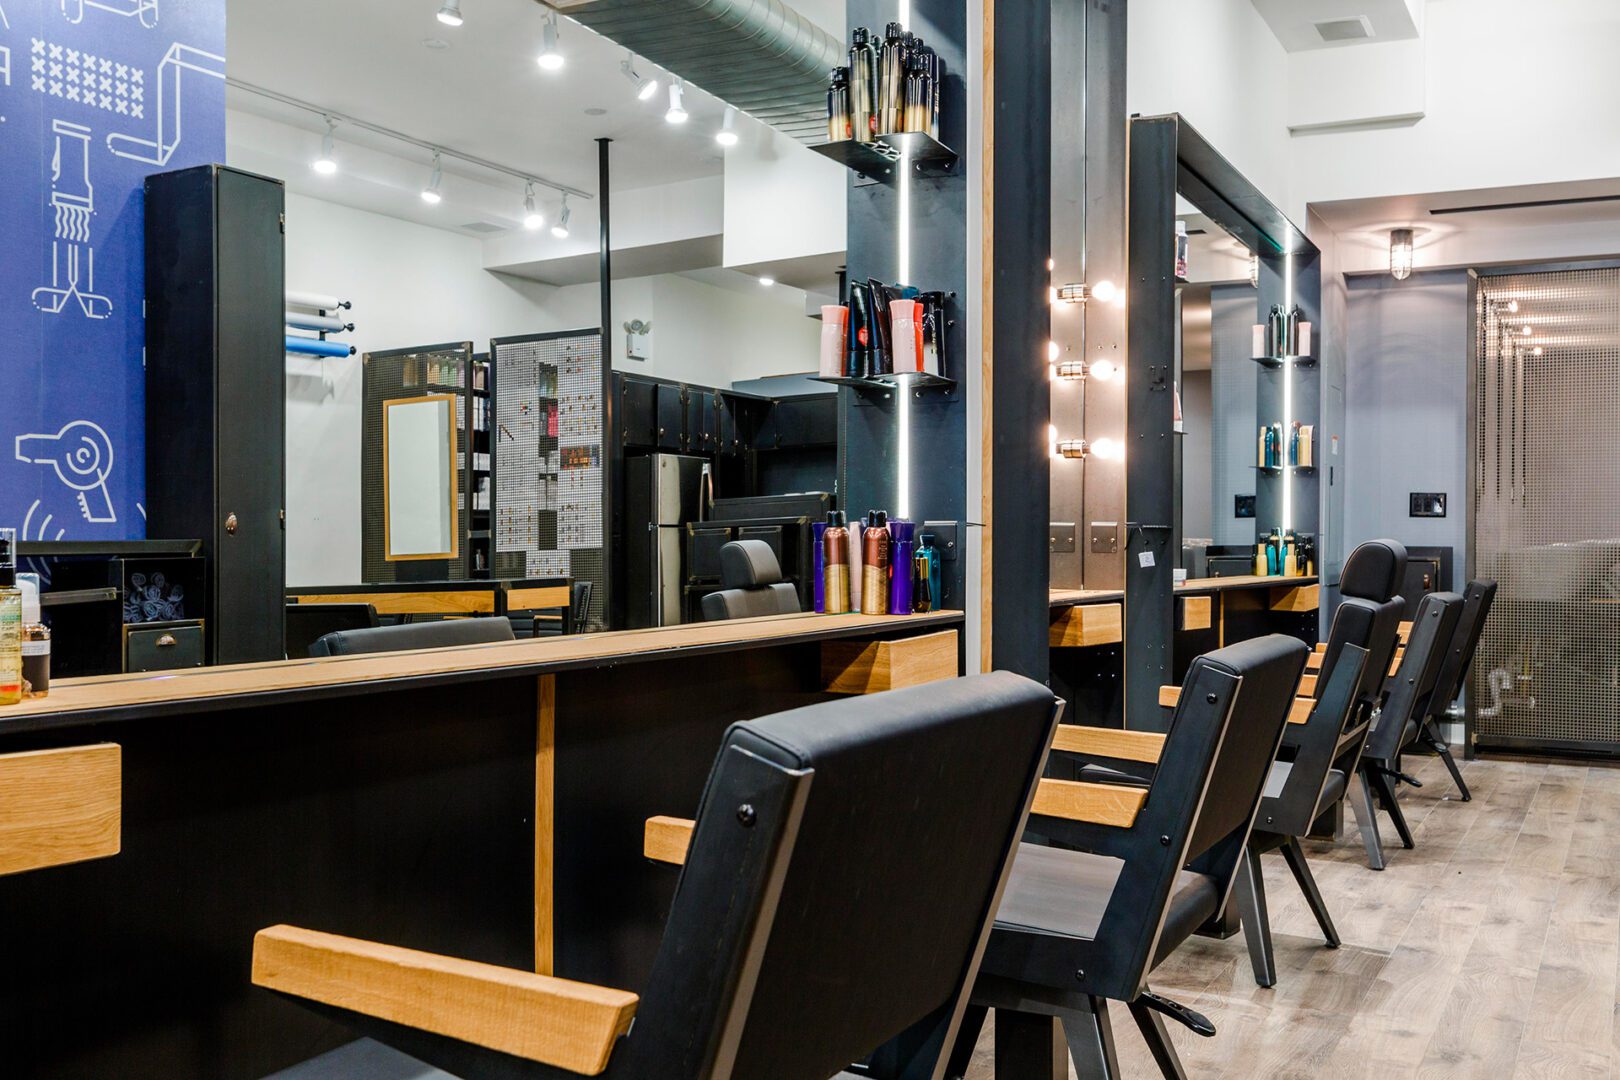 A hair salon with many chairs and mirrors